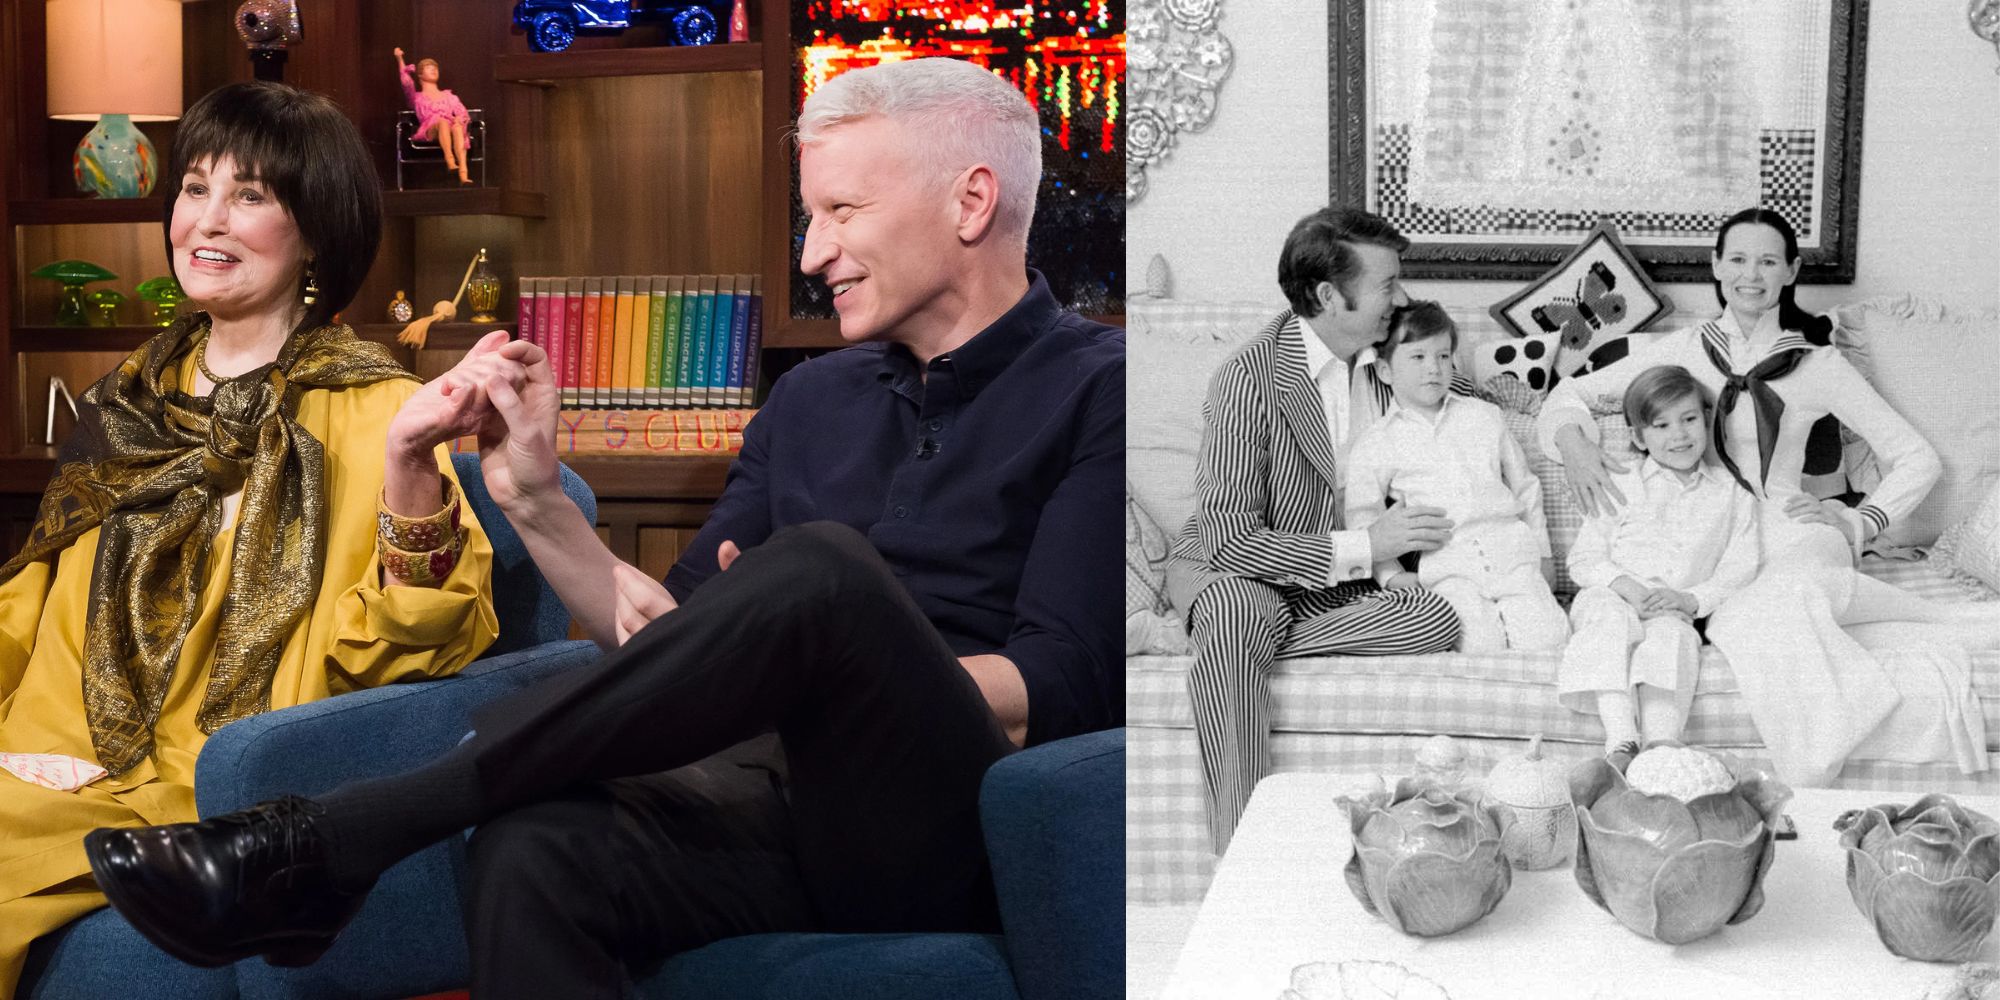 Who are Anderson Cooper Parents?